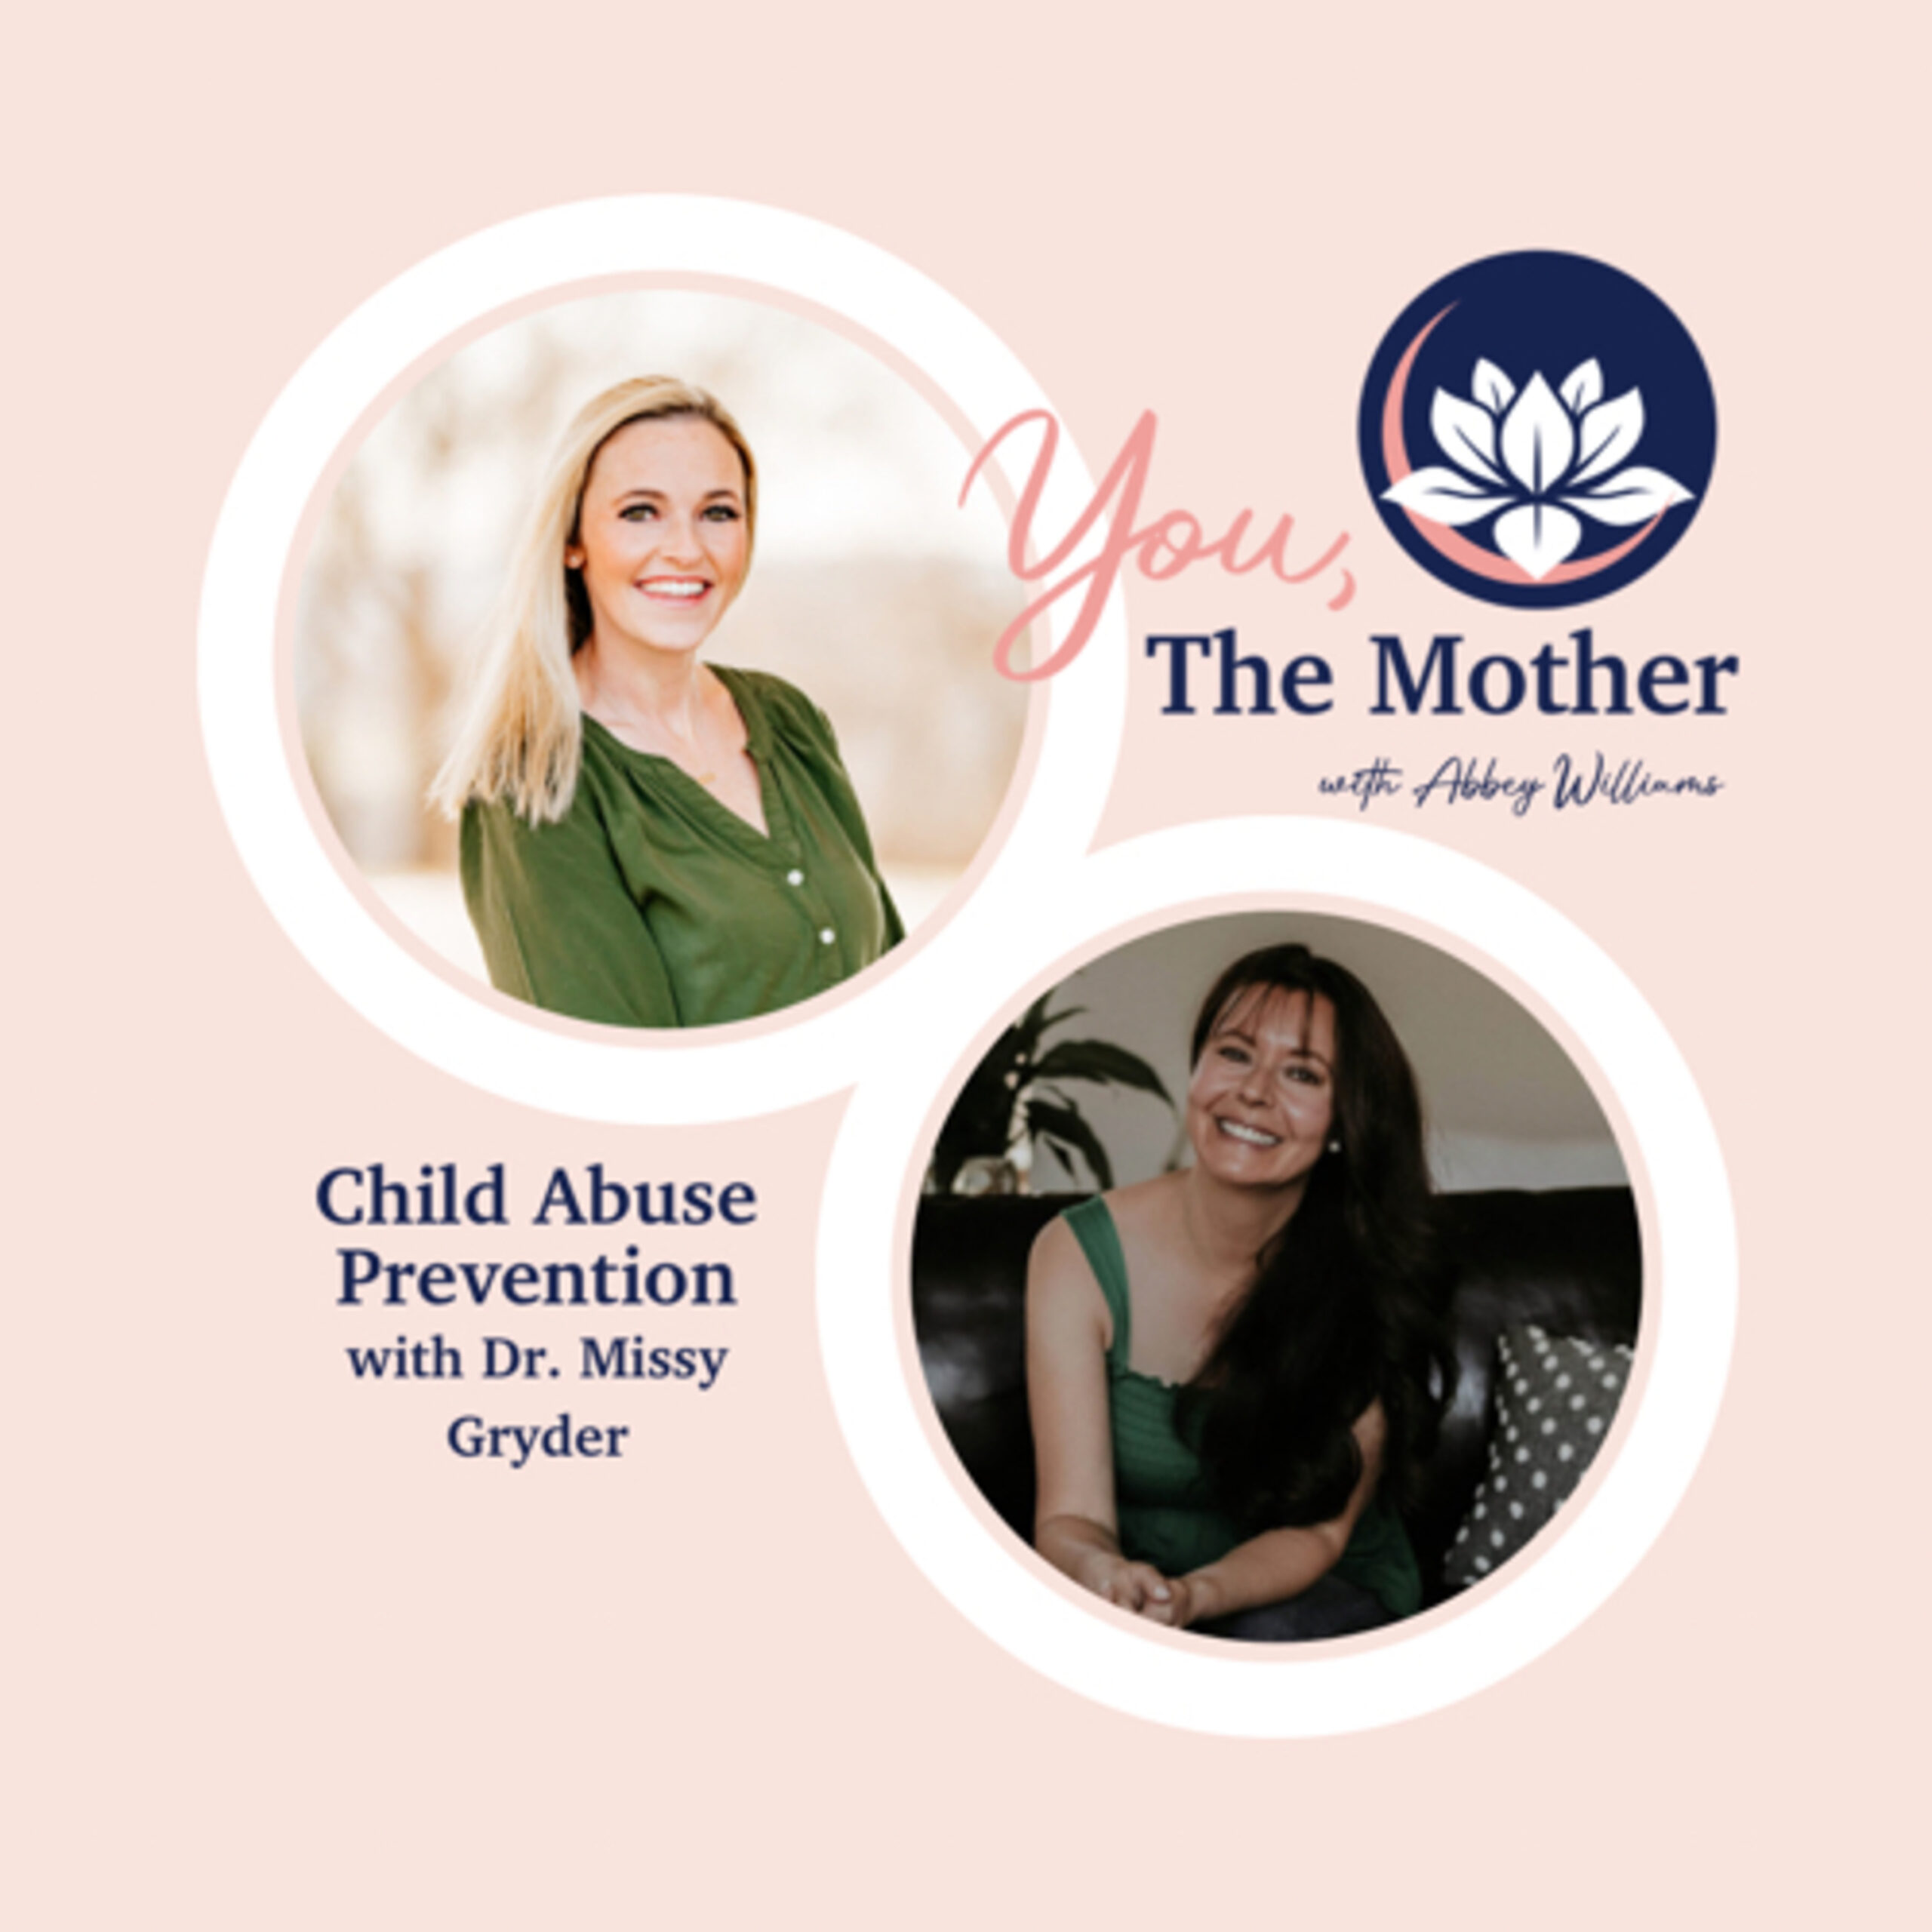 Child Abuse Prevention with Dr. Missy Gryder